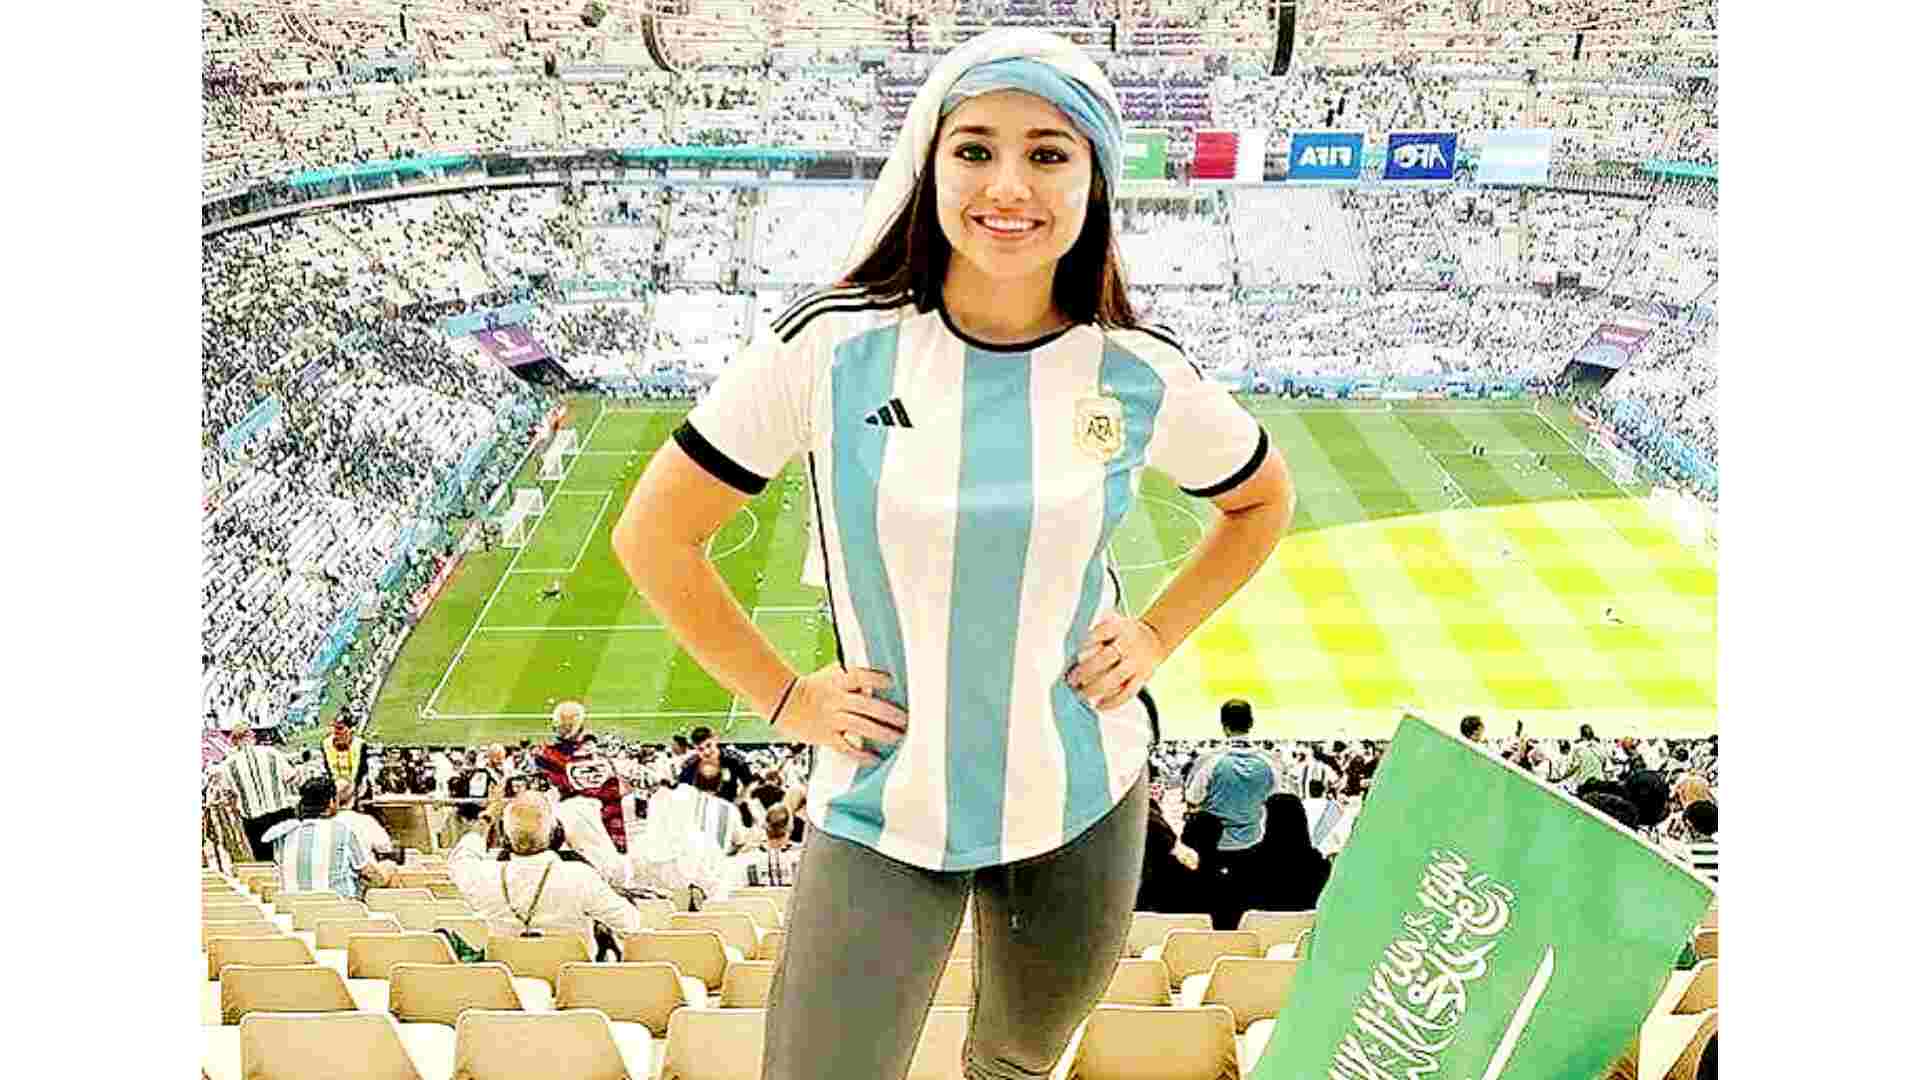 35,000 Argentina fans turned out to support their country; #messi, #fansArgentina, #finalArjentinaQatherworldcup,